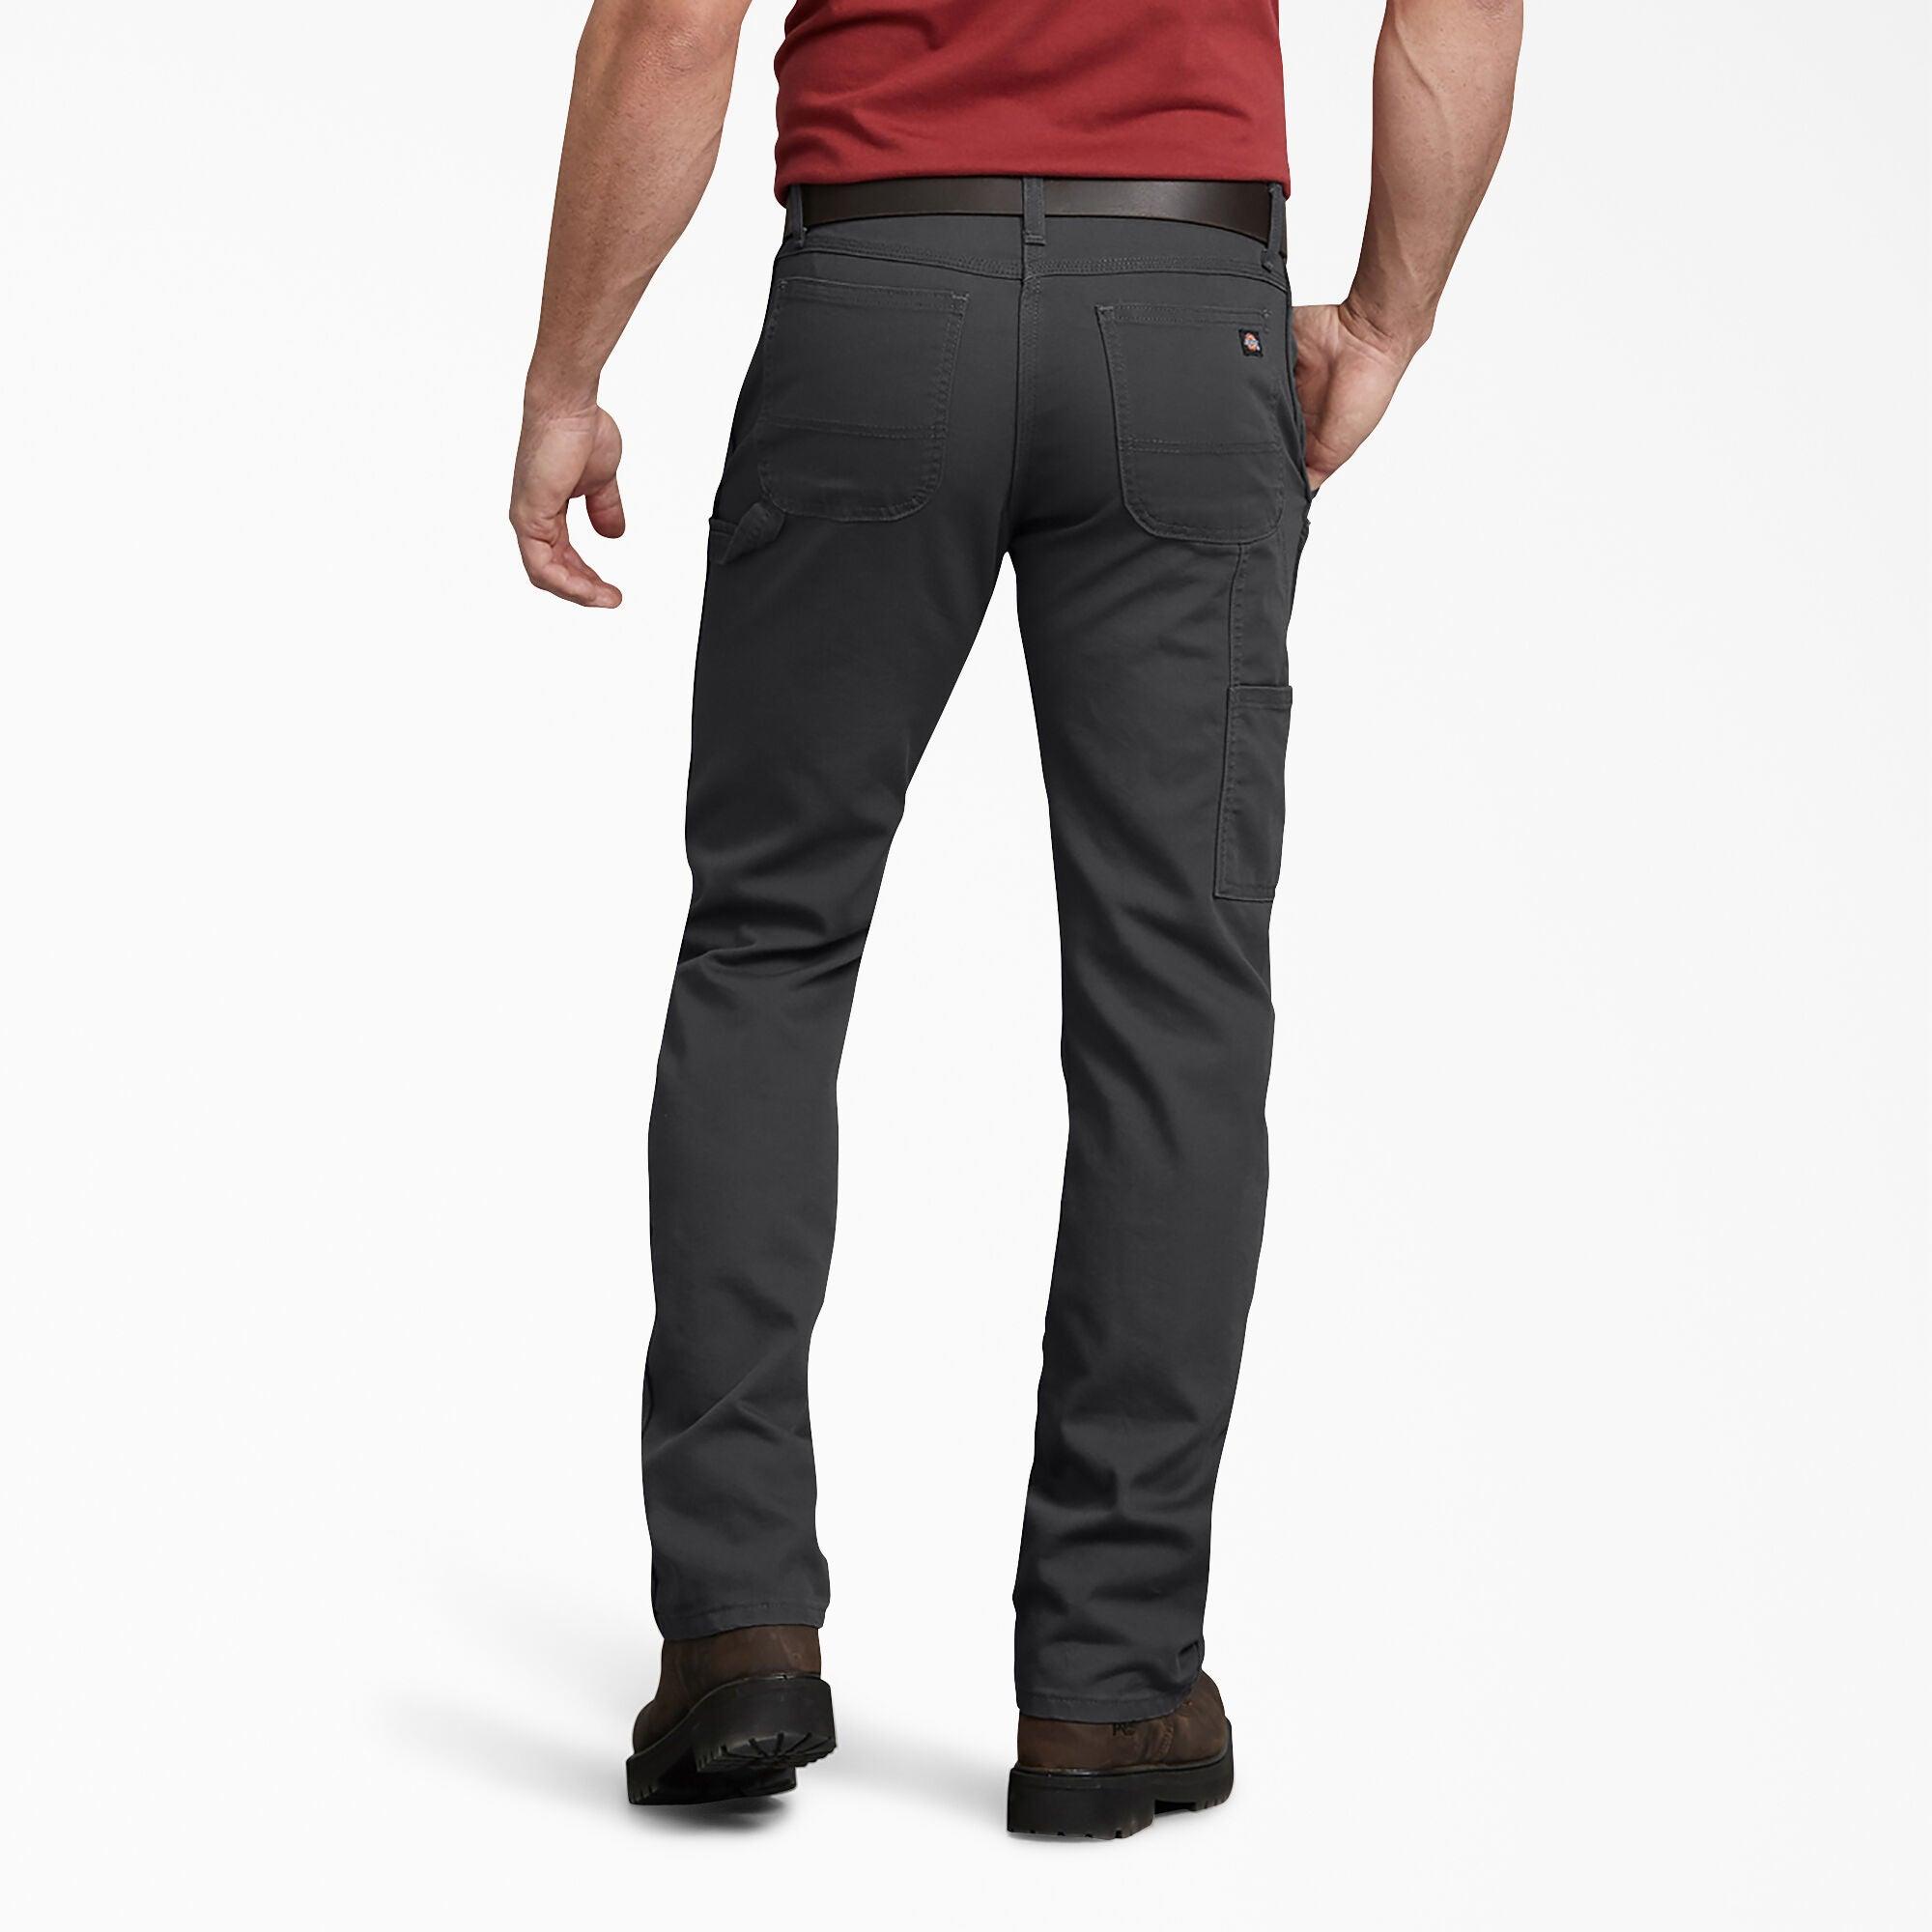 FLEX Regular Fit Duck Carpenter Pants, Stonewashed Gray - Purpose-Built / Home of the Trades